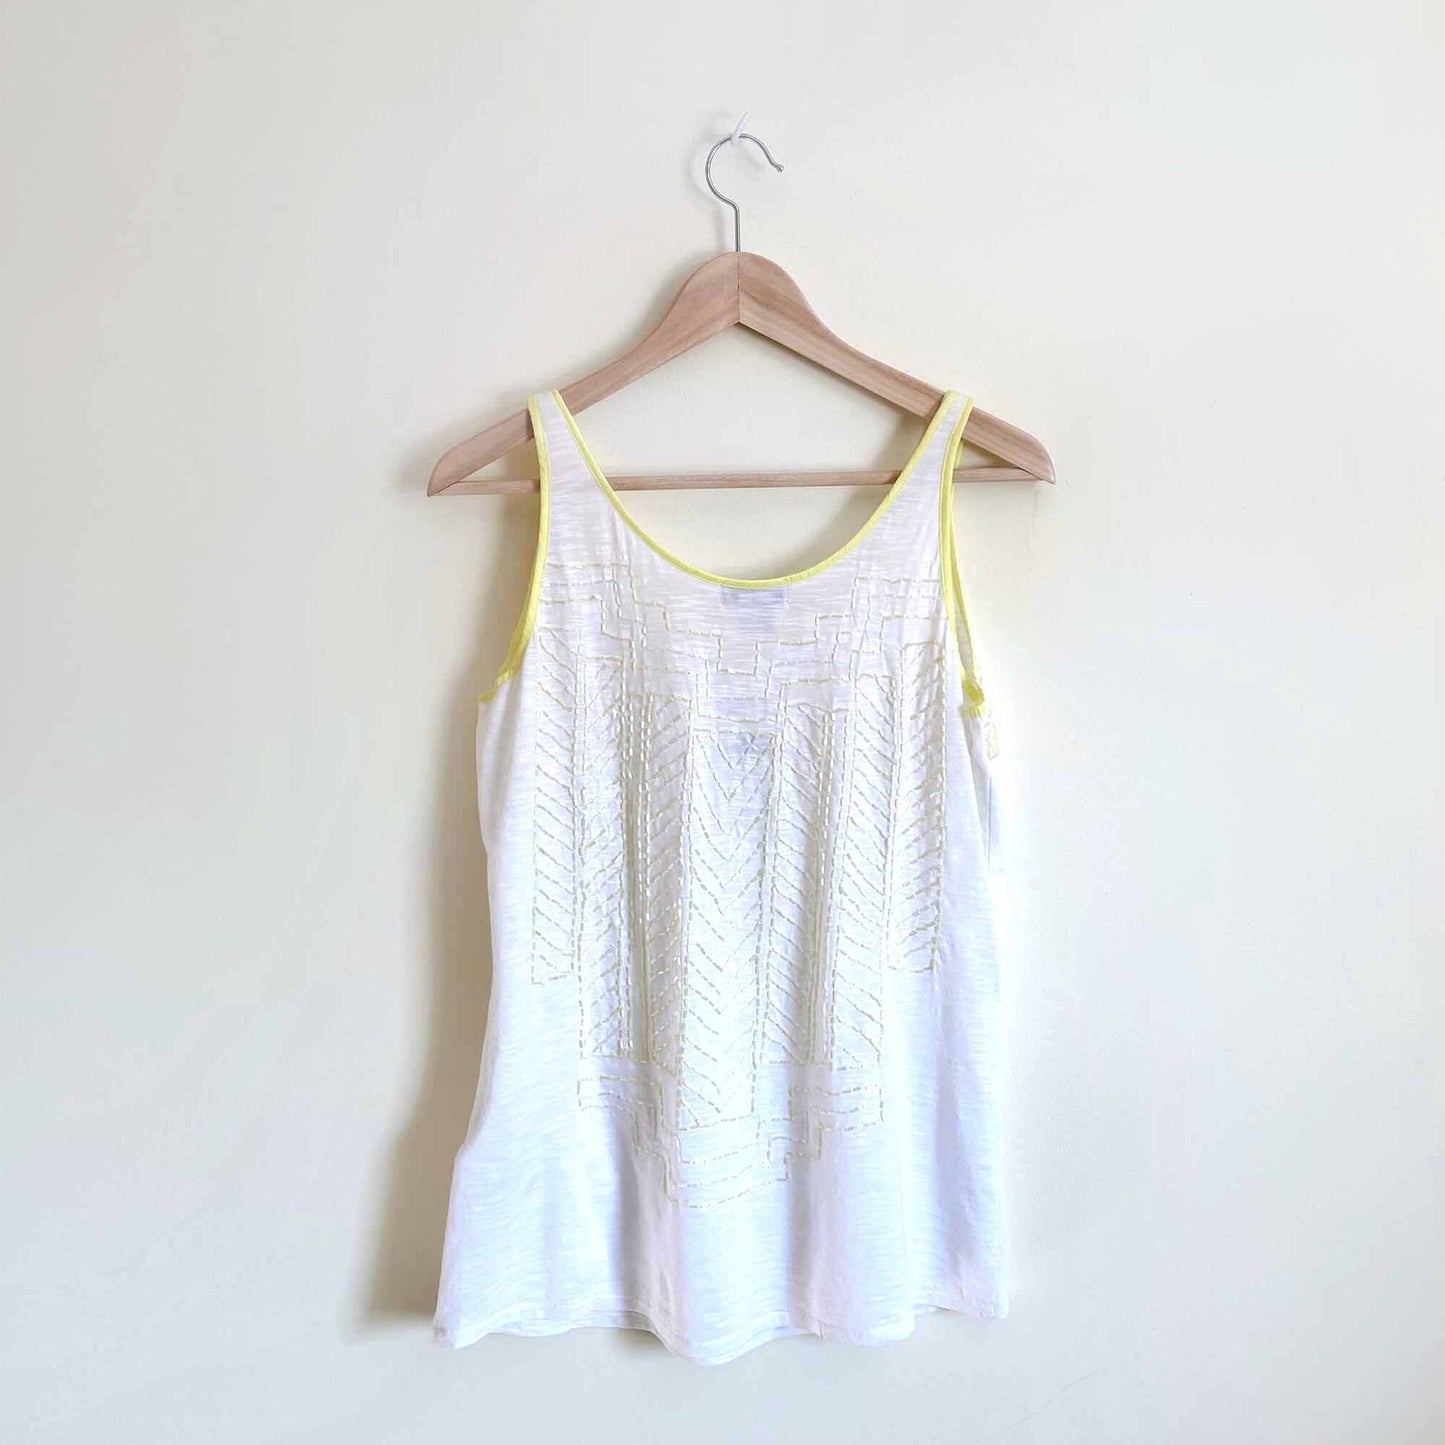 nwt lucky brand beaded embellished tank top - size medium